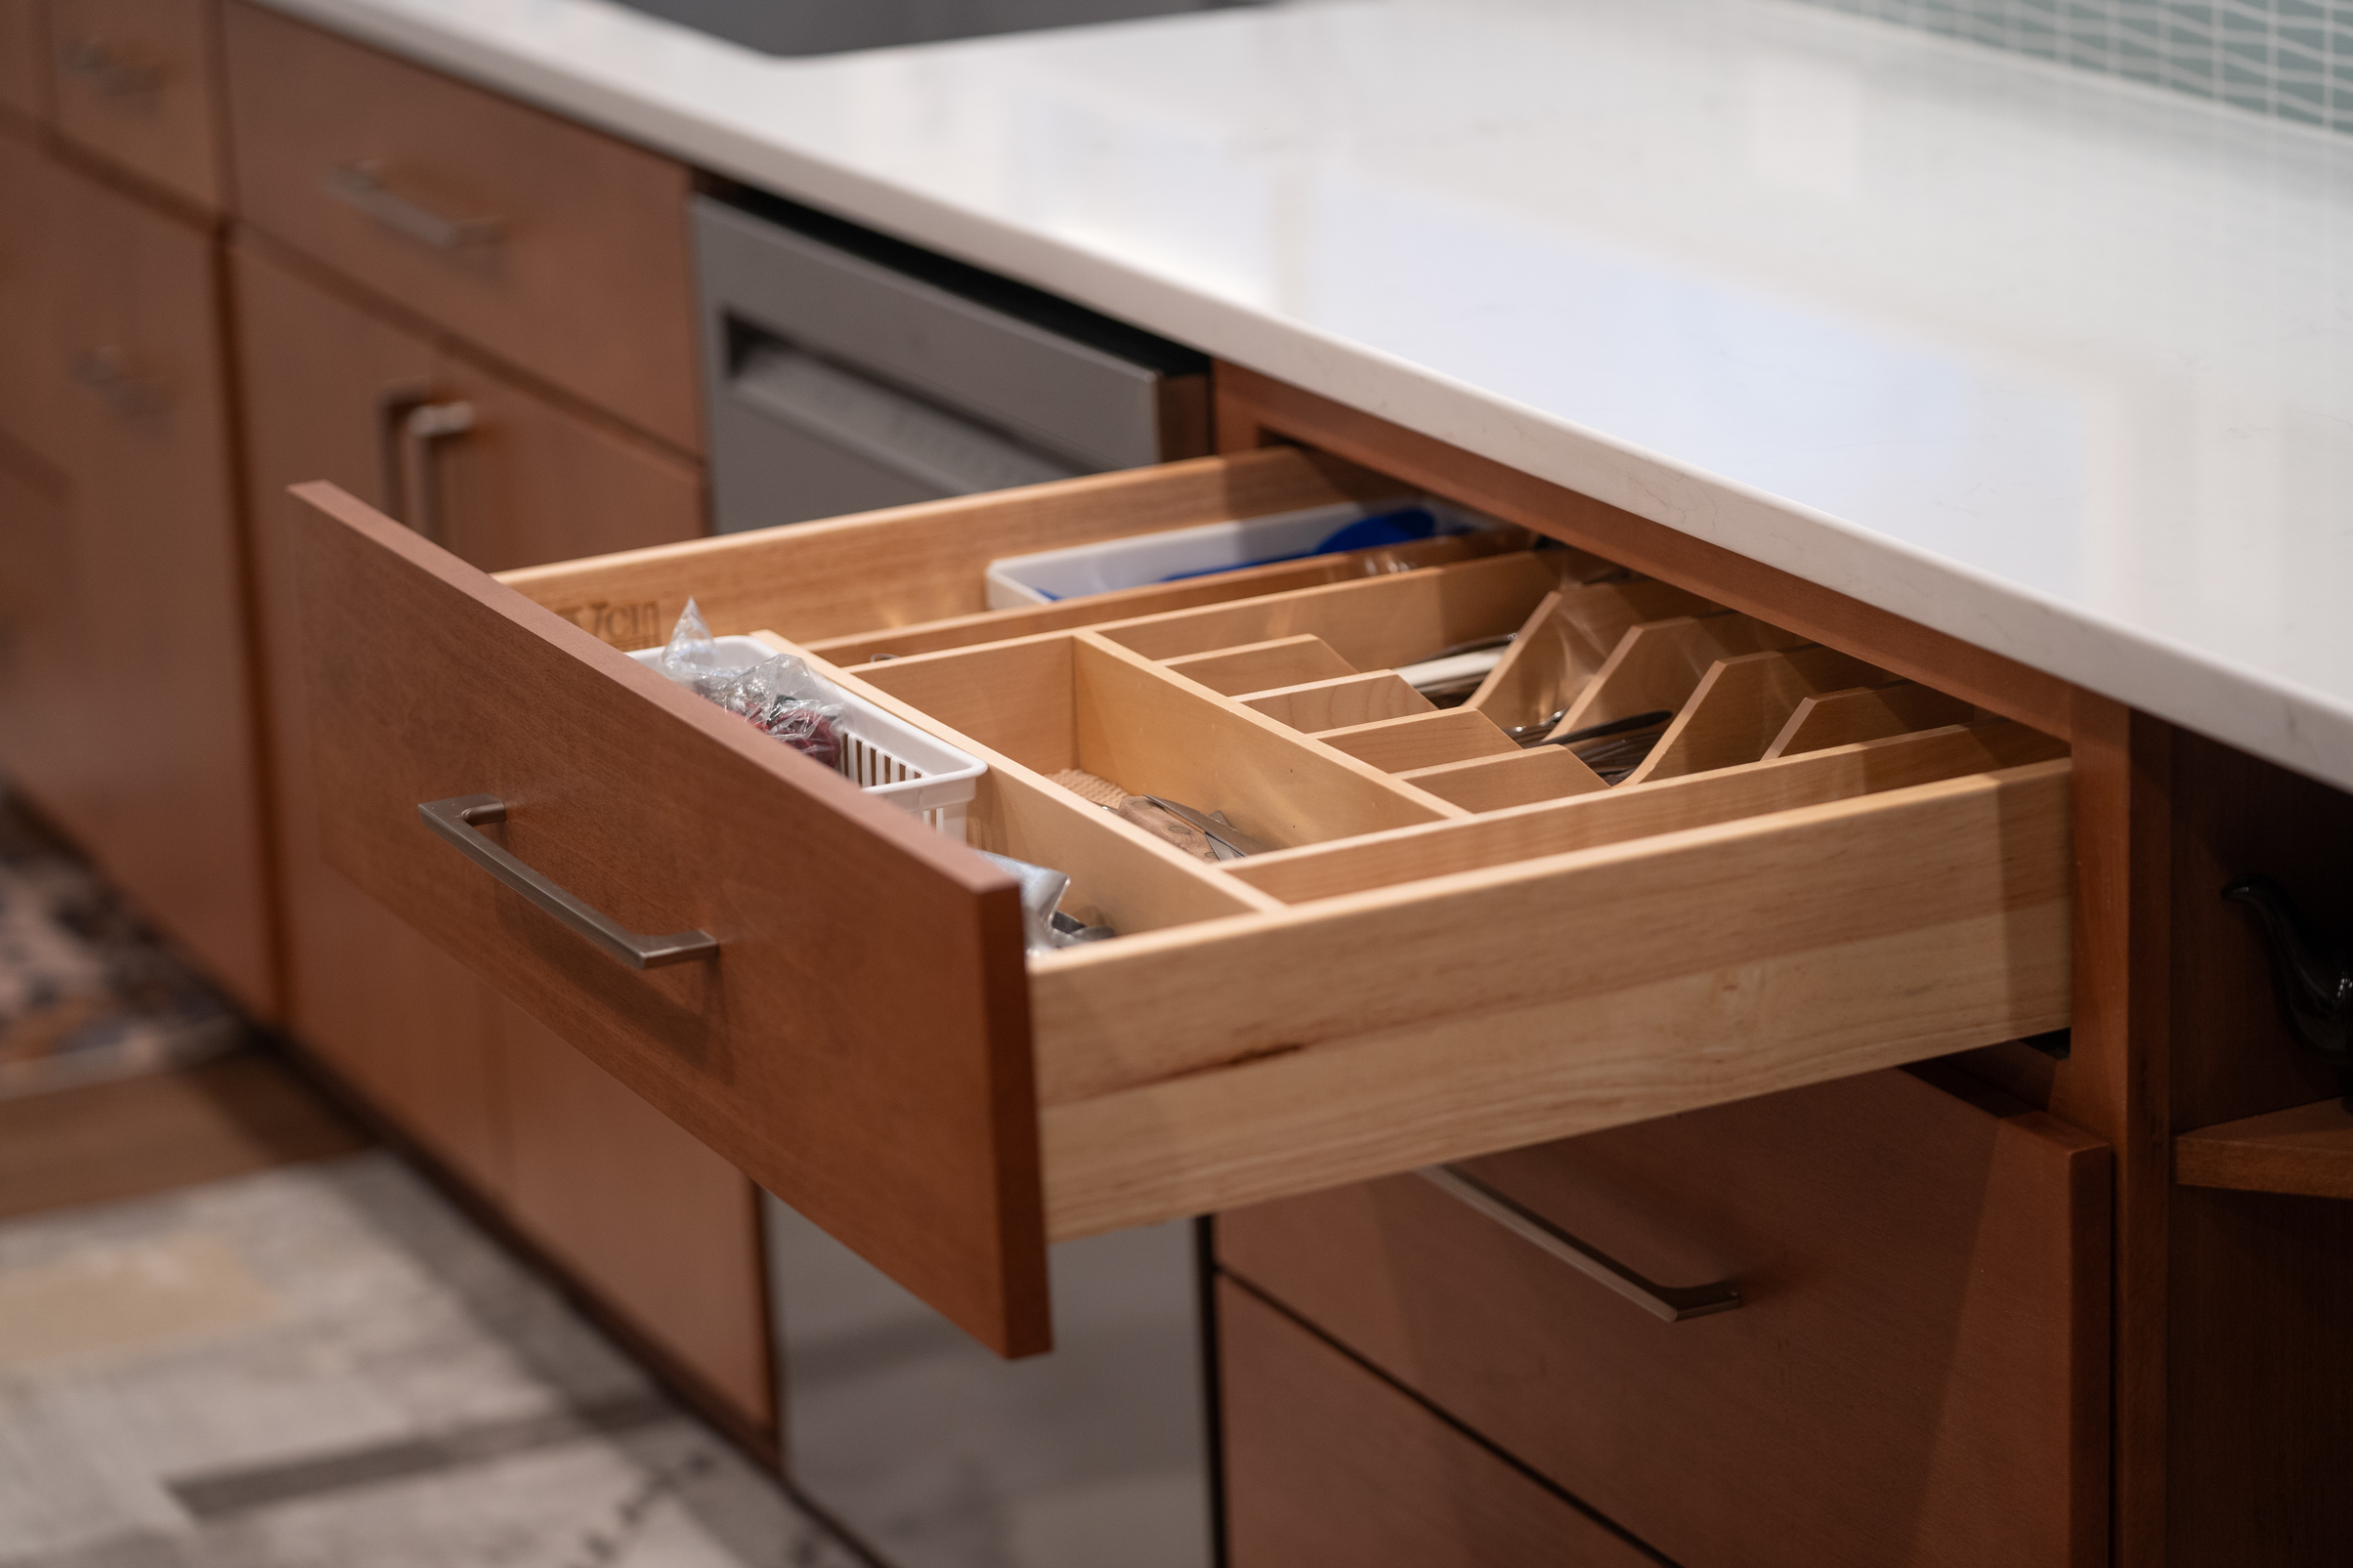 Drawer with built-in silverware dividers